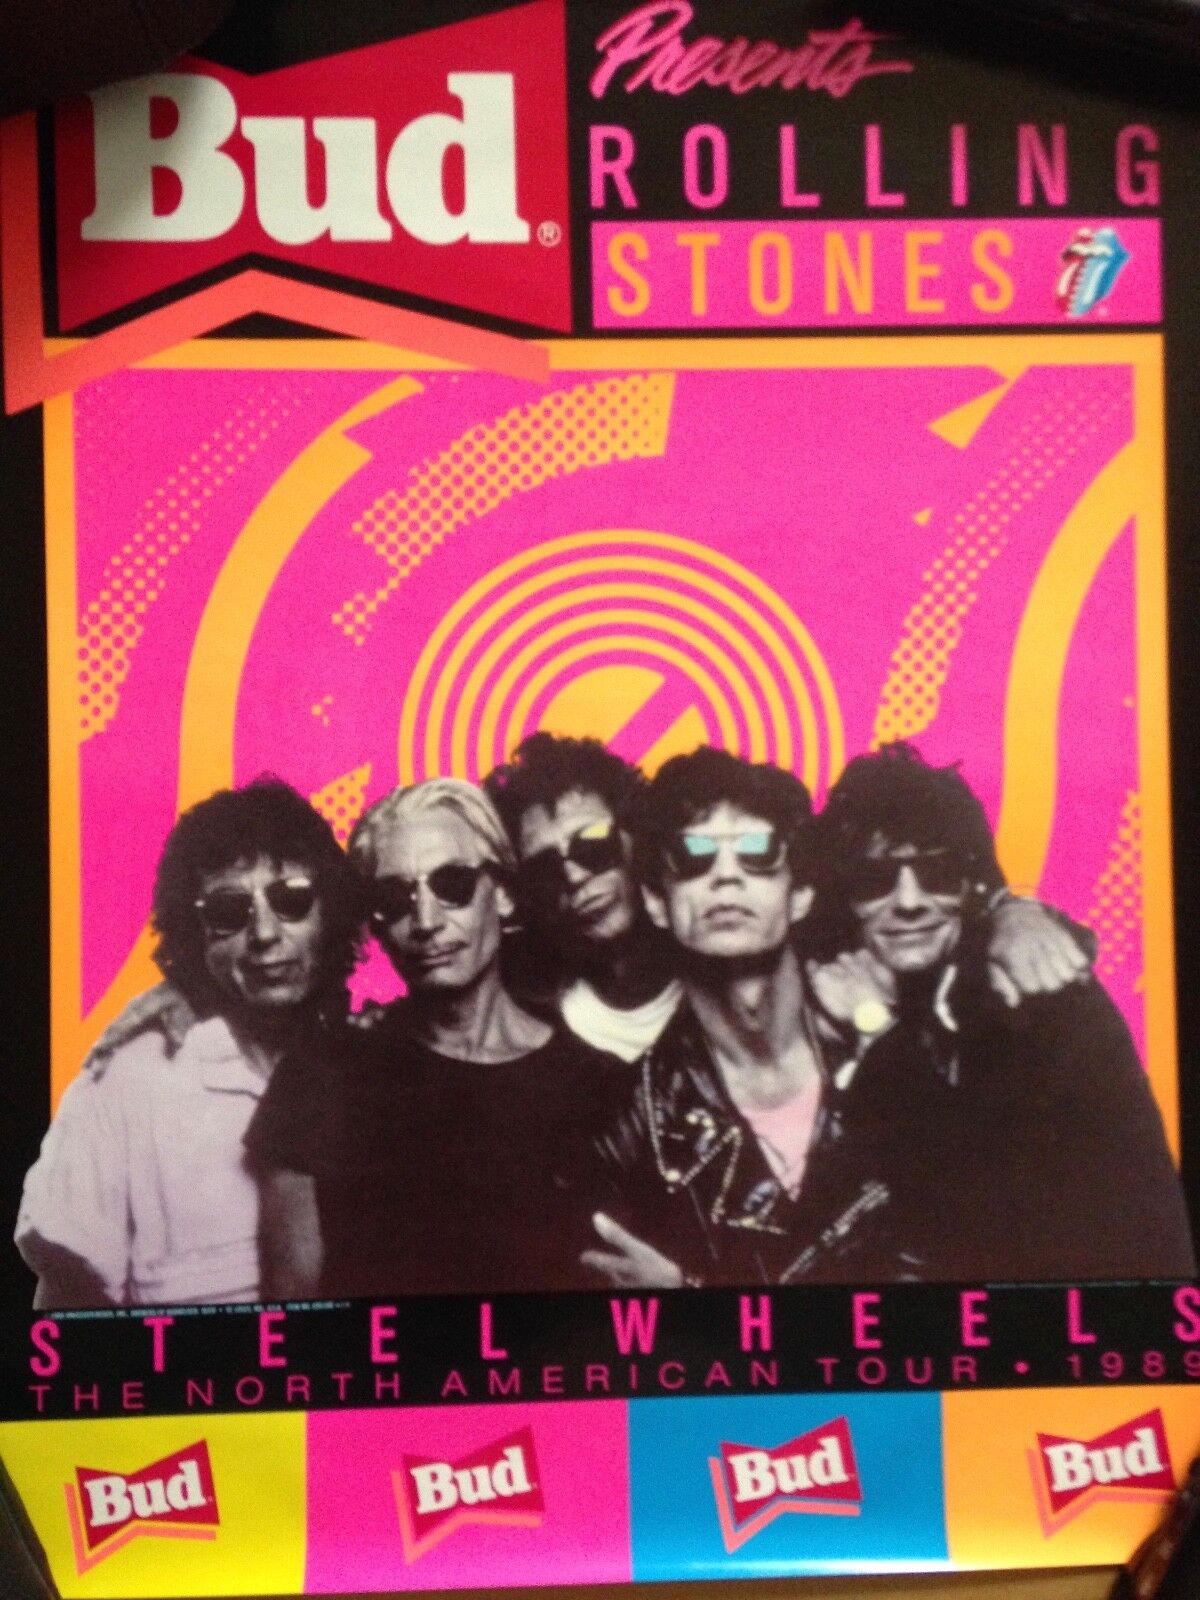 The Rolling Stones Steel Wheels Tour Poster 1989 Mick Jagger Charlie Watts Cd Lp